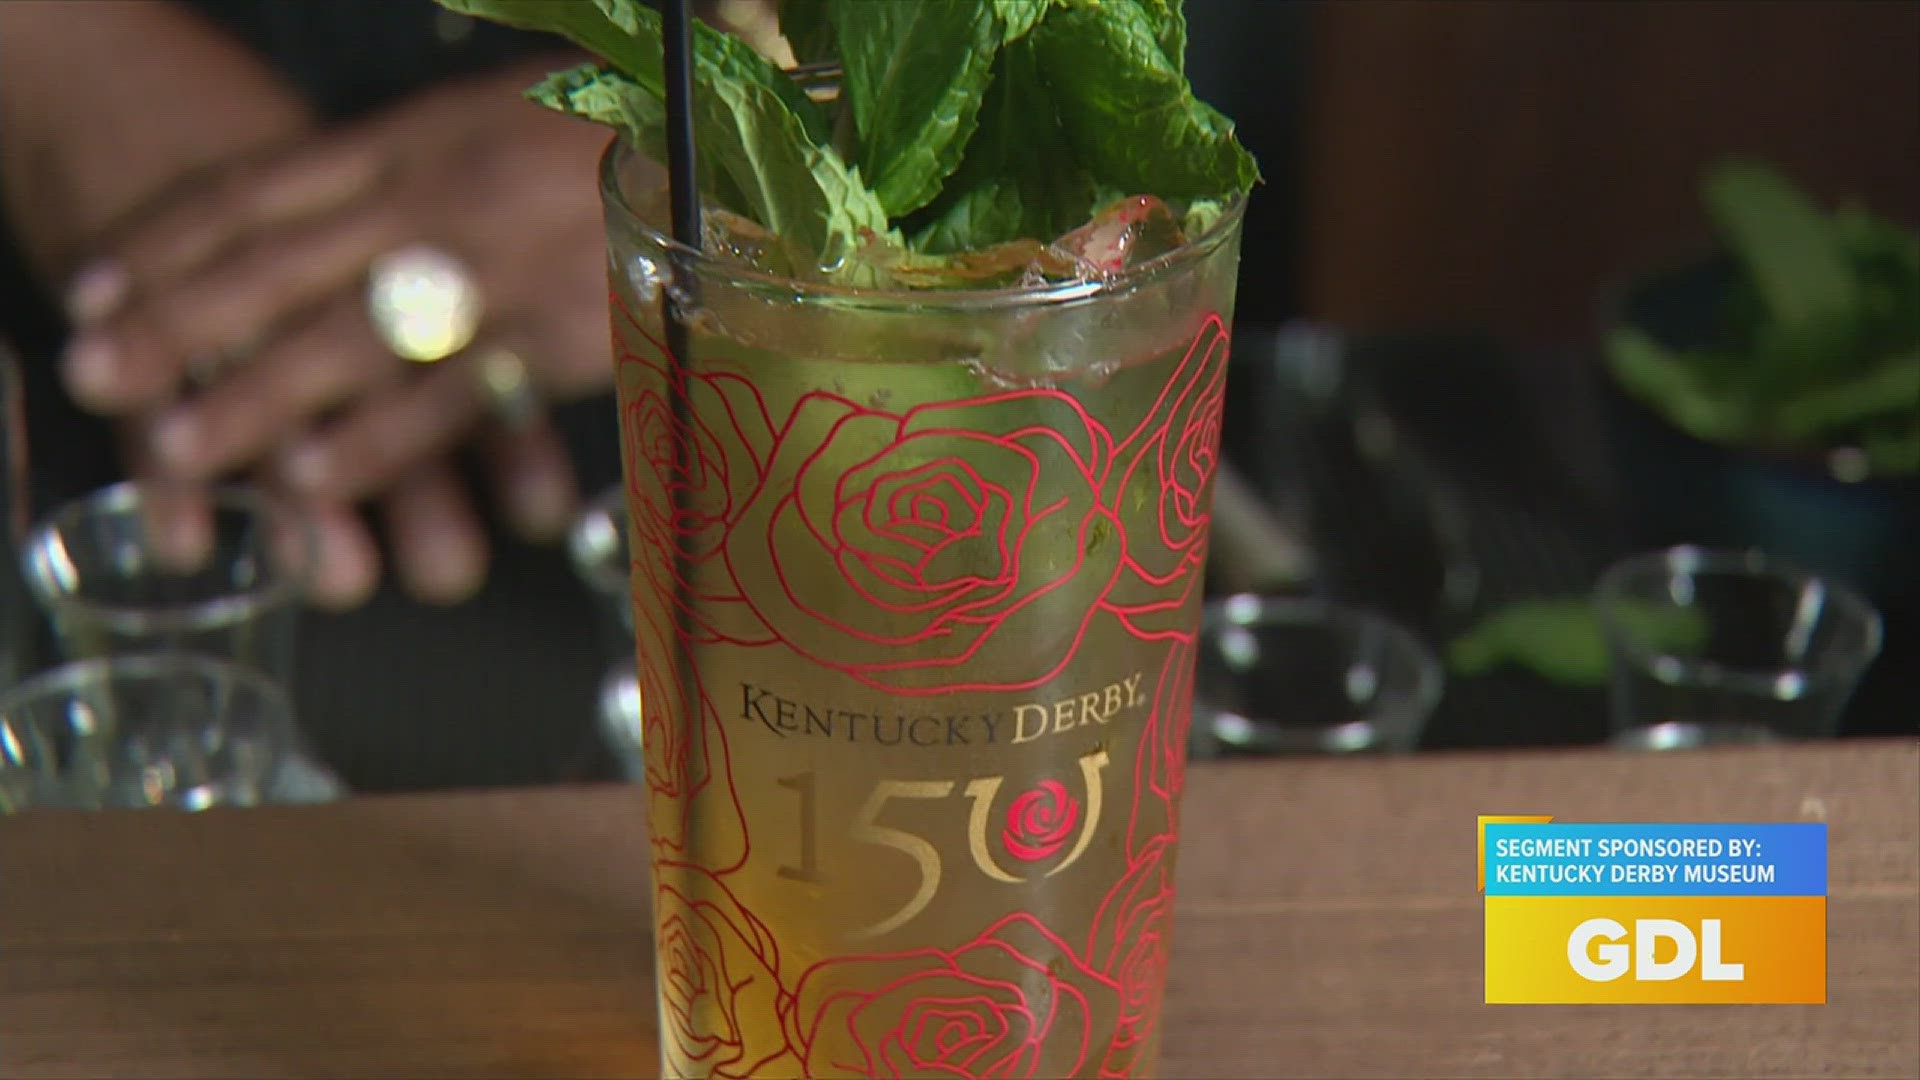 If you want to learn how to make a mint julep, the Kentucky Derby Museum has you covered!